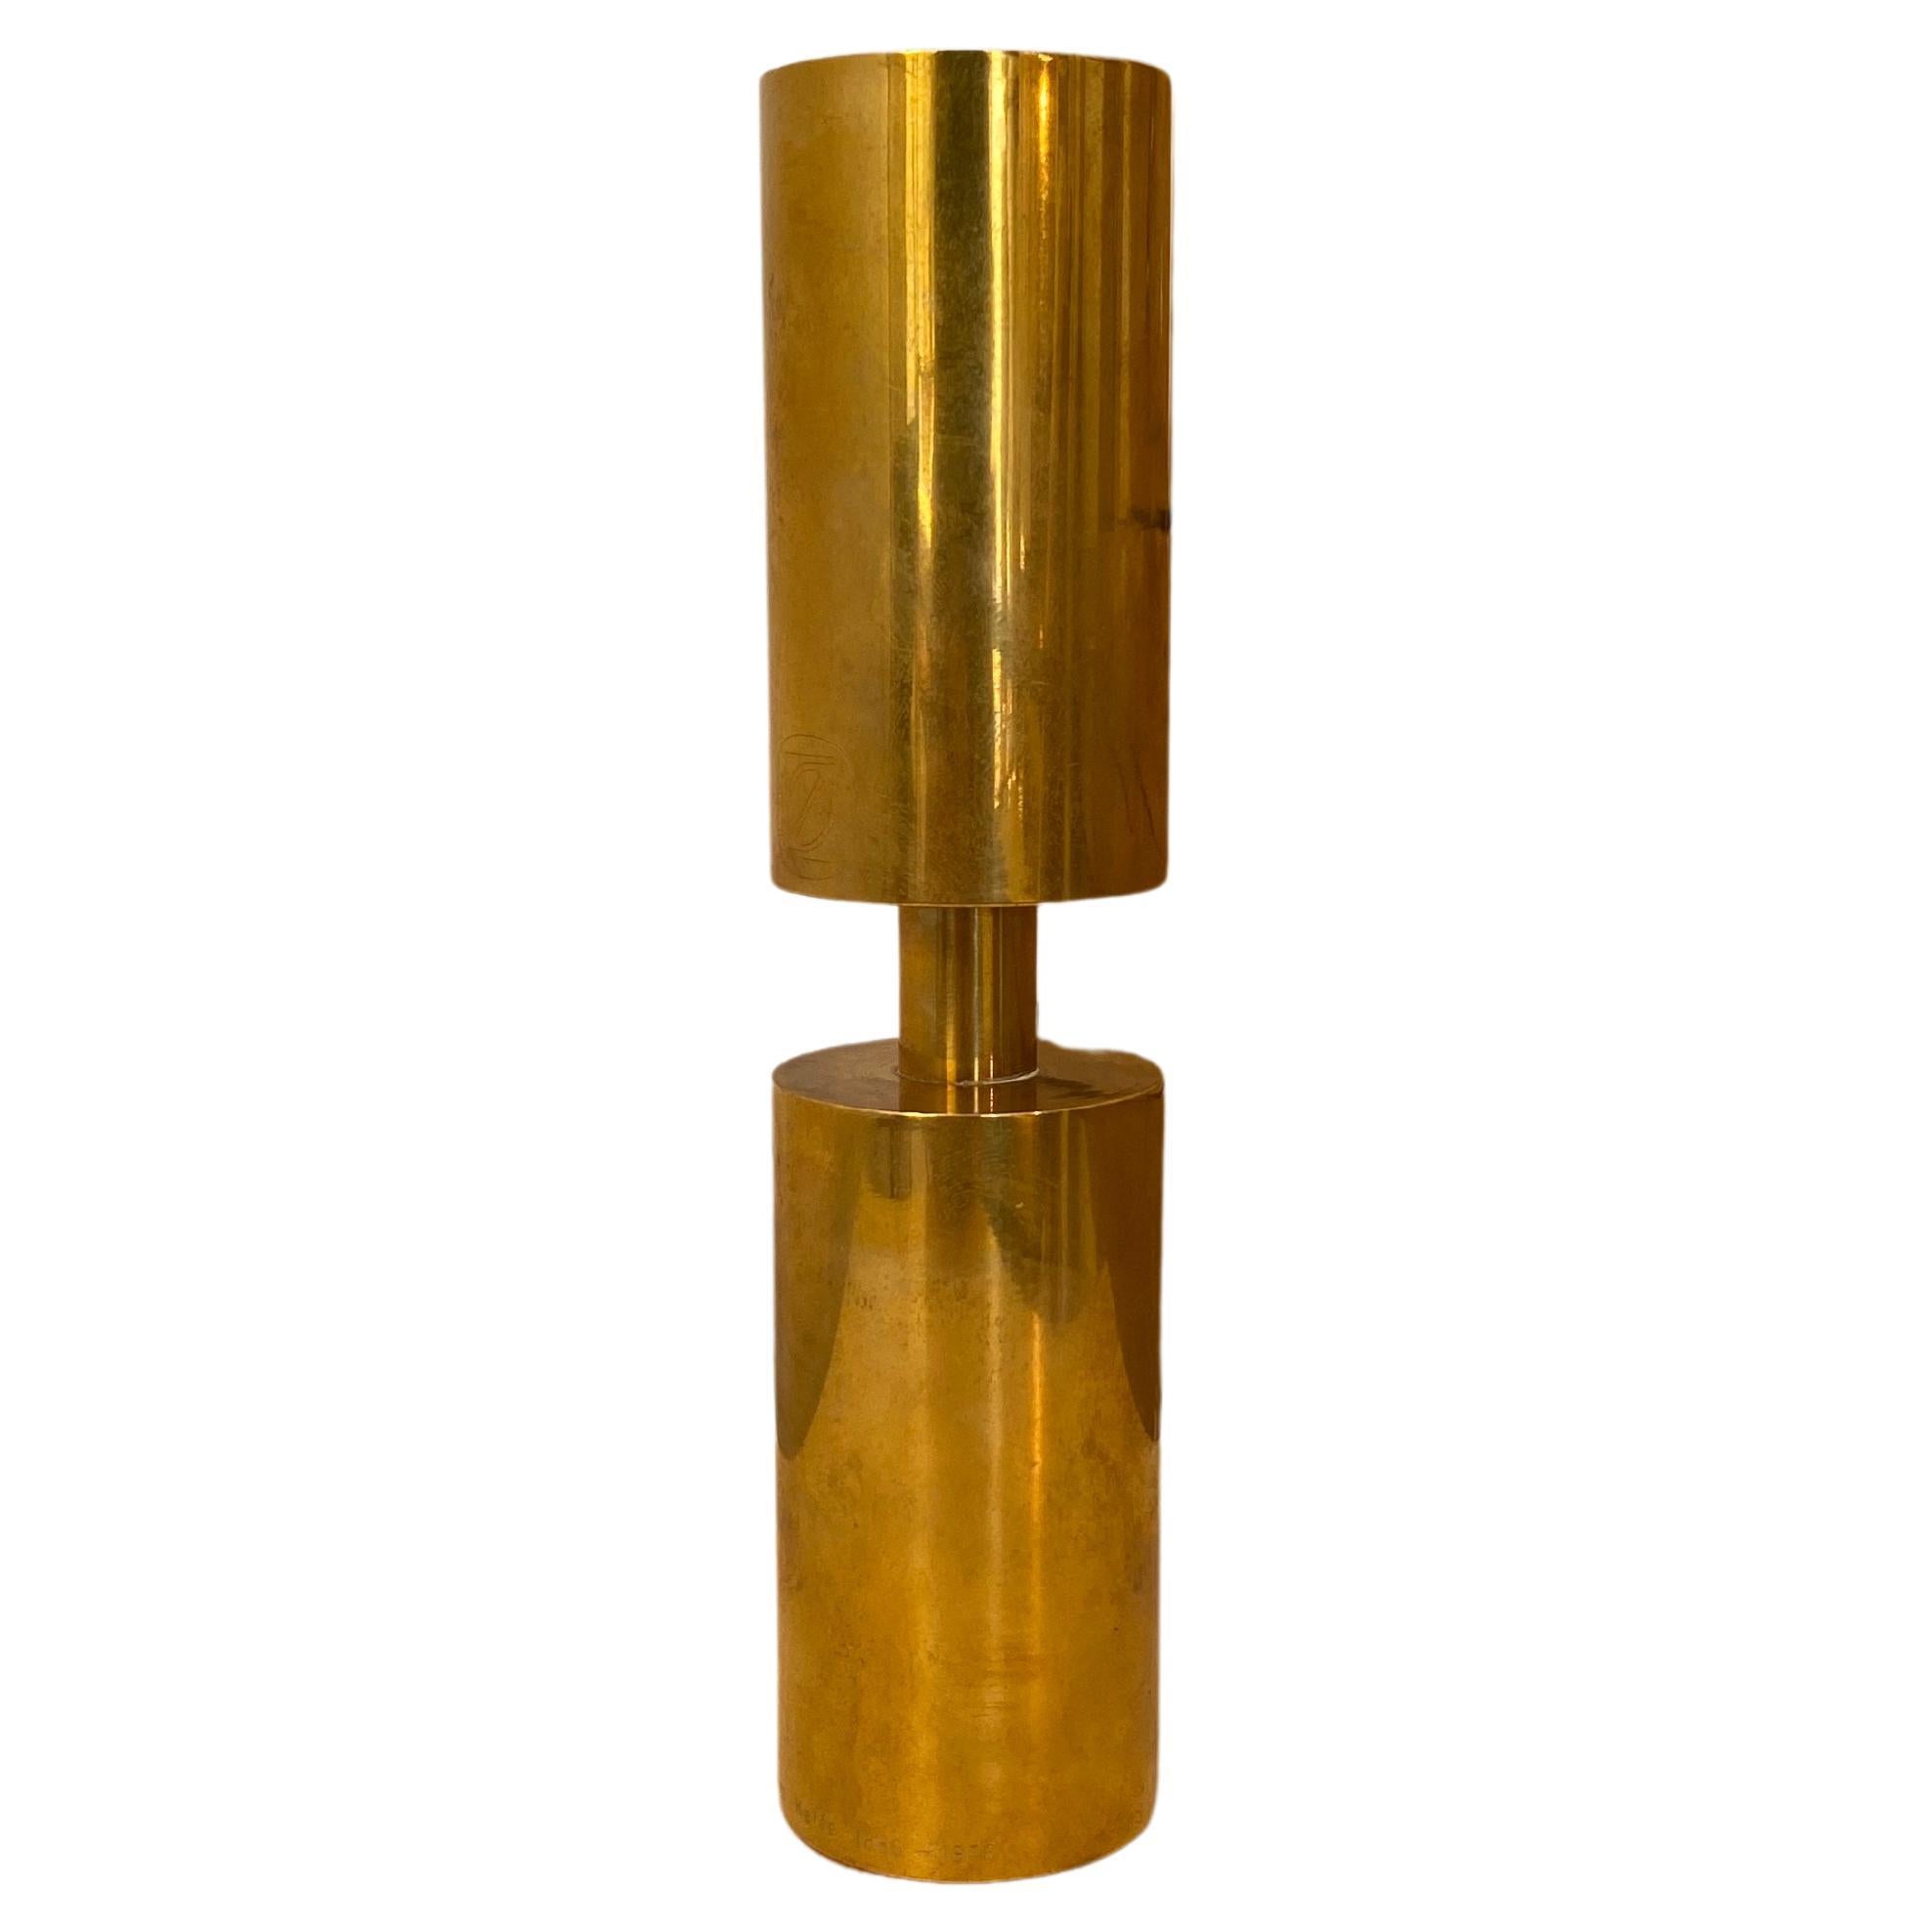 Candle Holder by Thelma Zoega, 1970-1979